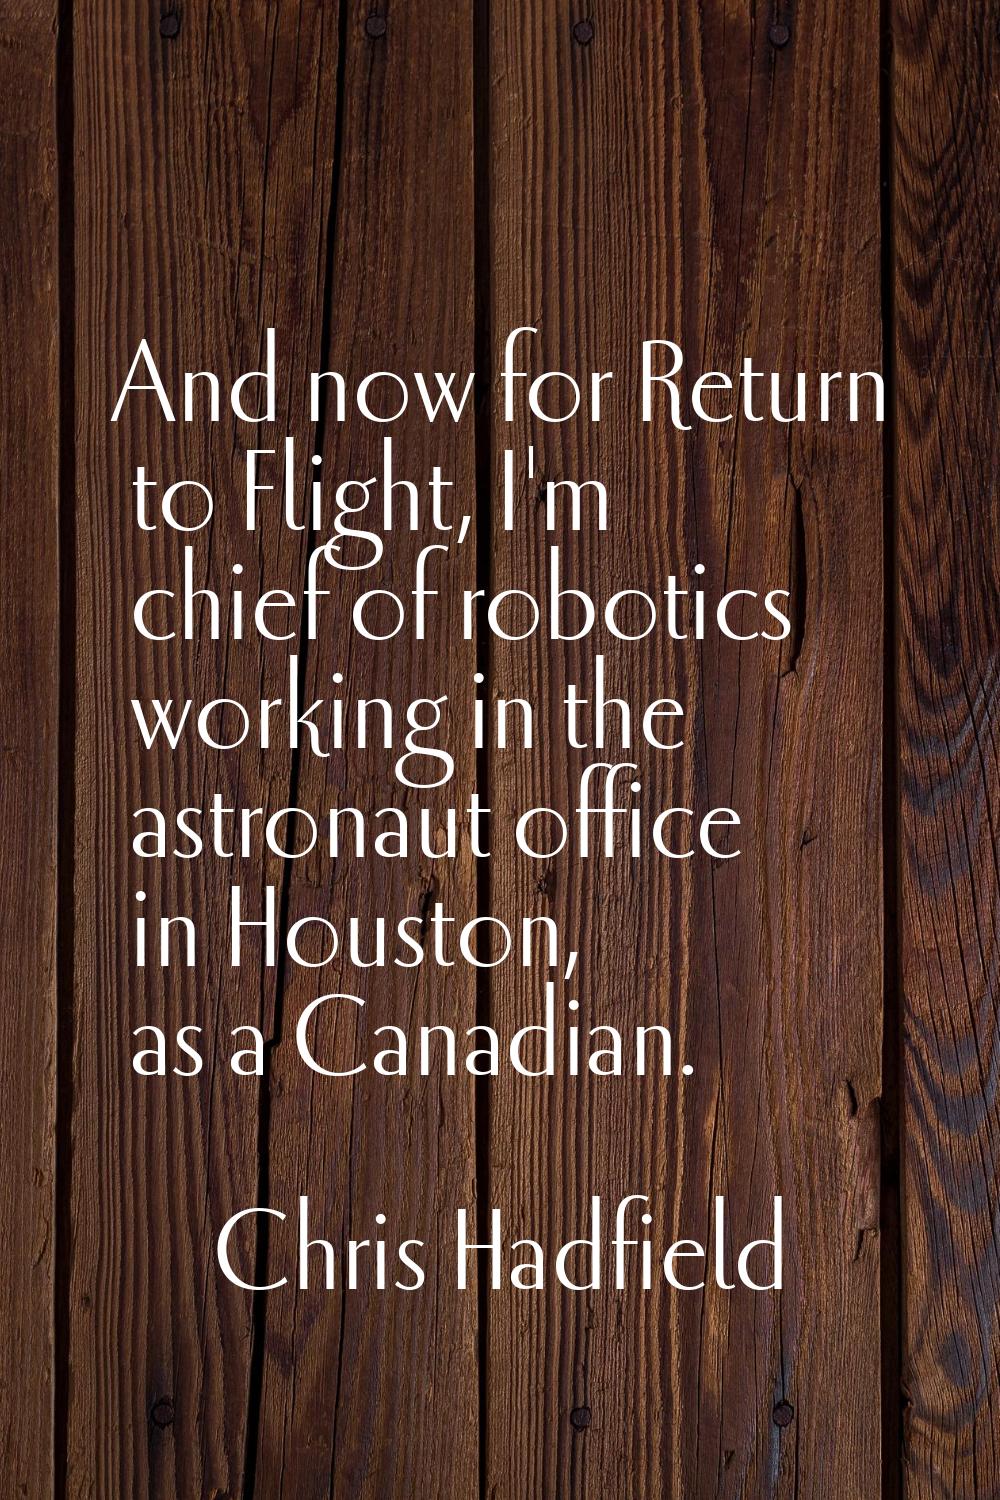 And now for Return to Flight, I'm chief of robotics working in the astronaut office in Houston, as 